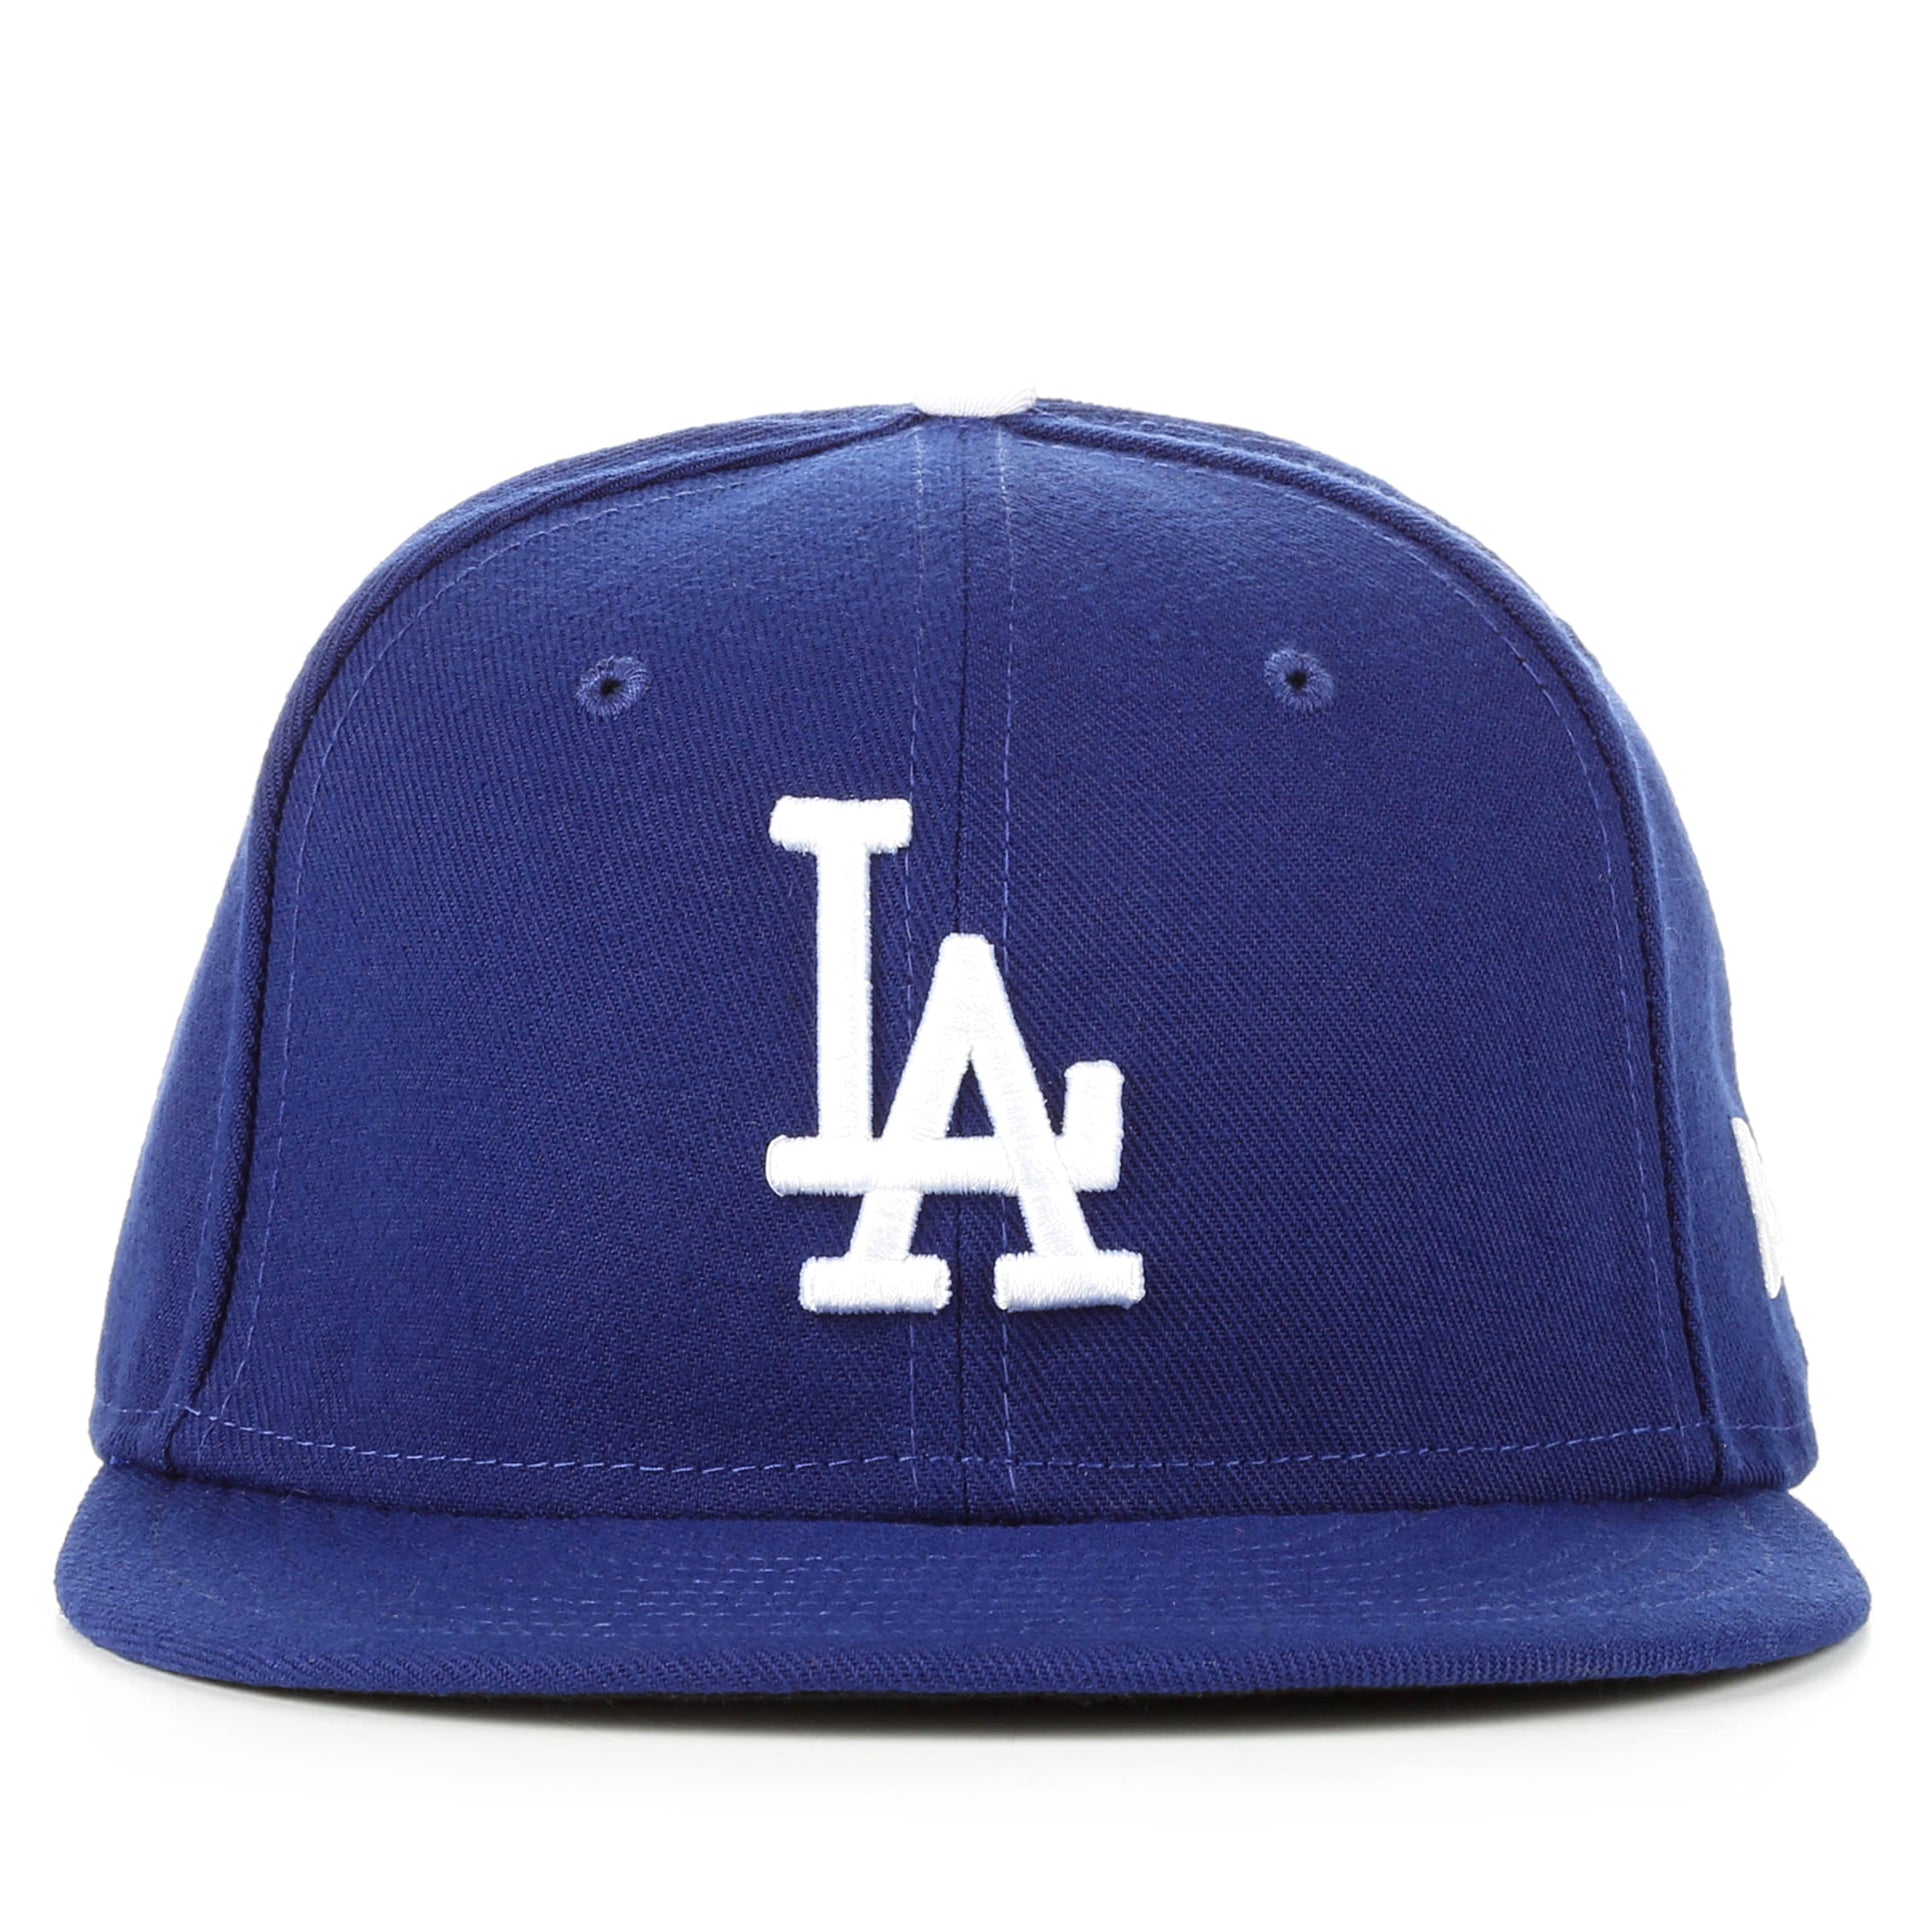 New Era Men's MLB AC 59FIFTY Los Angeles Dodgers Home Fitted Cap